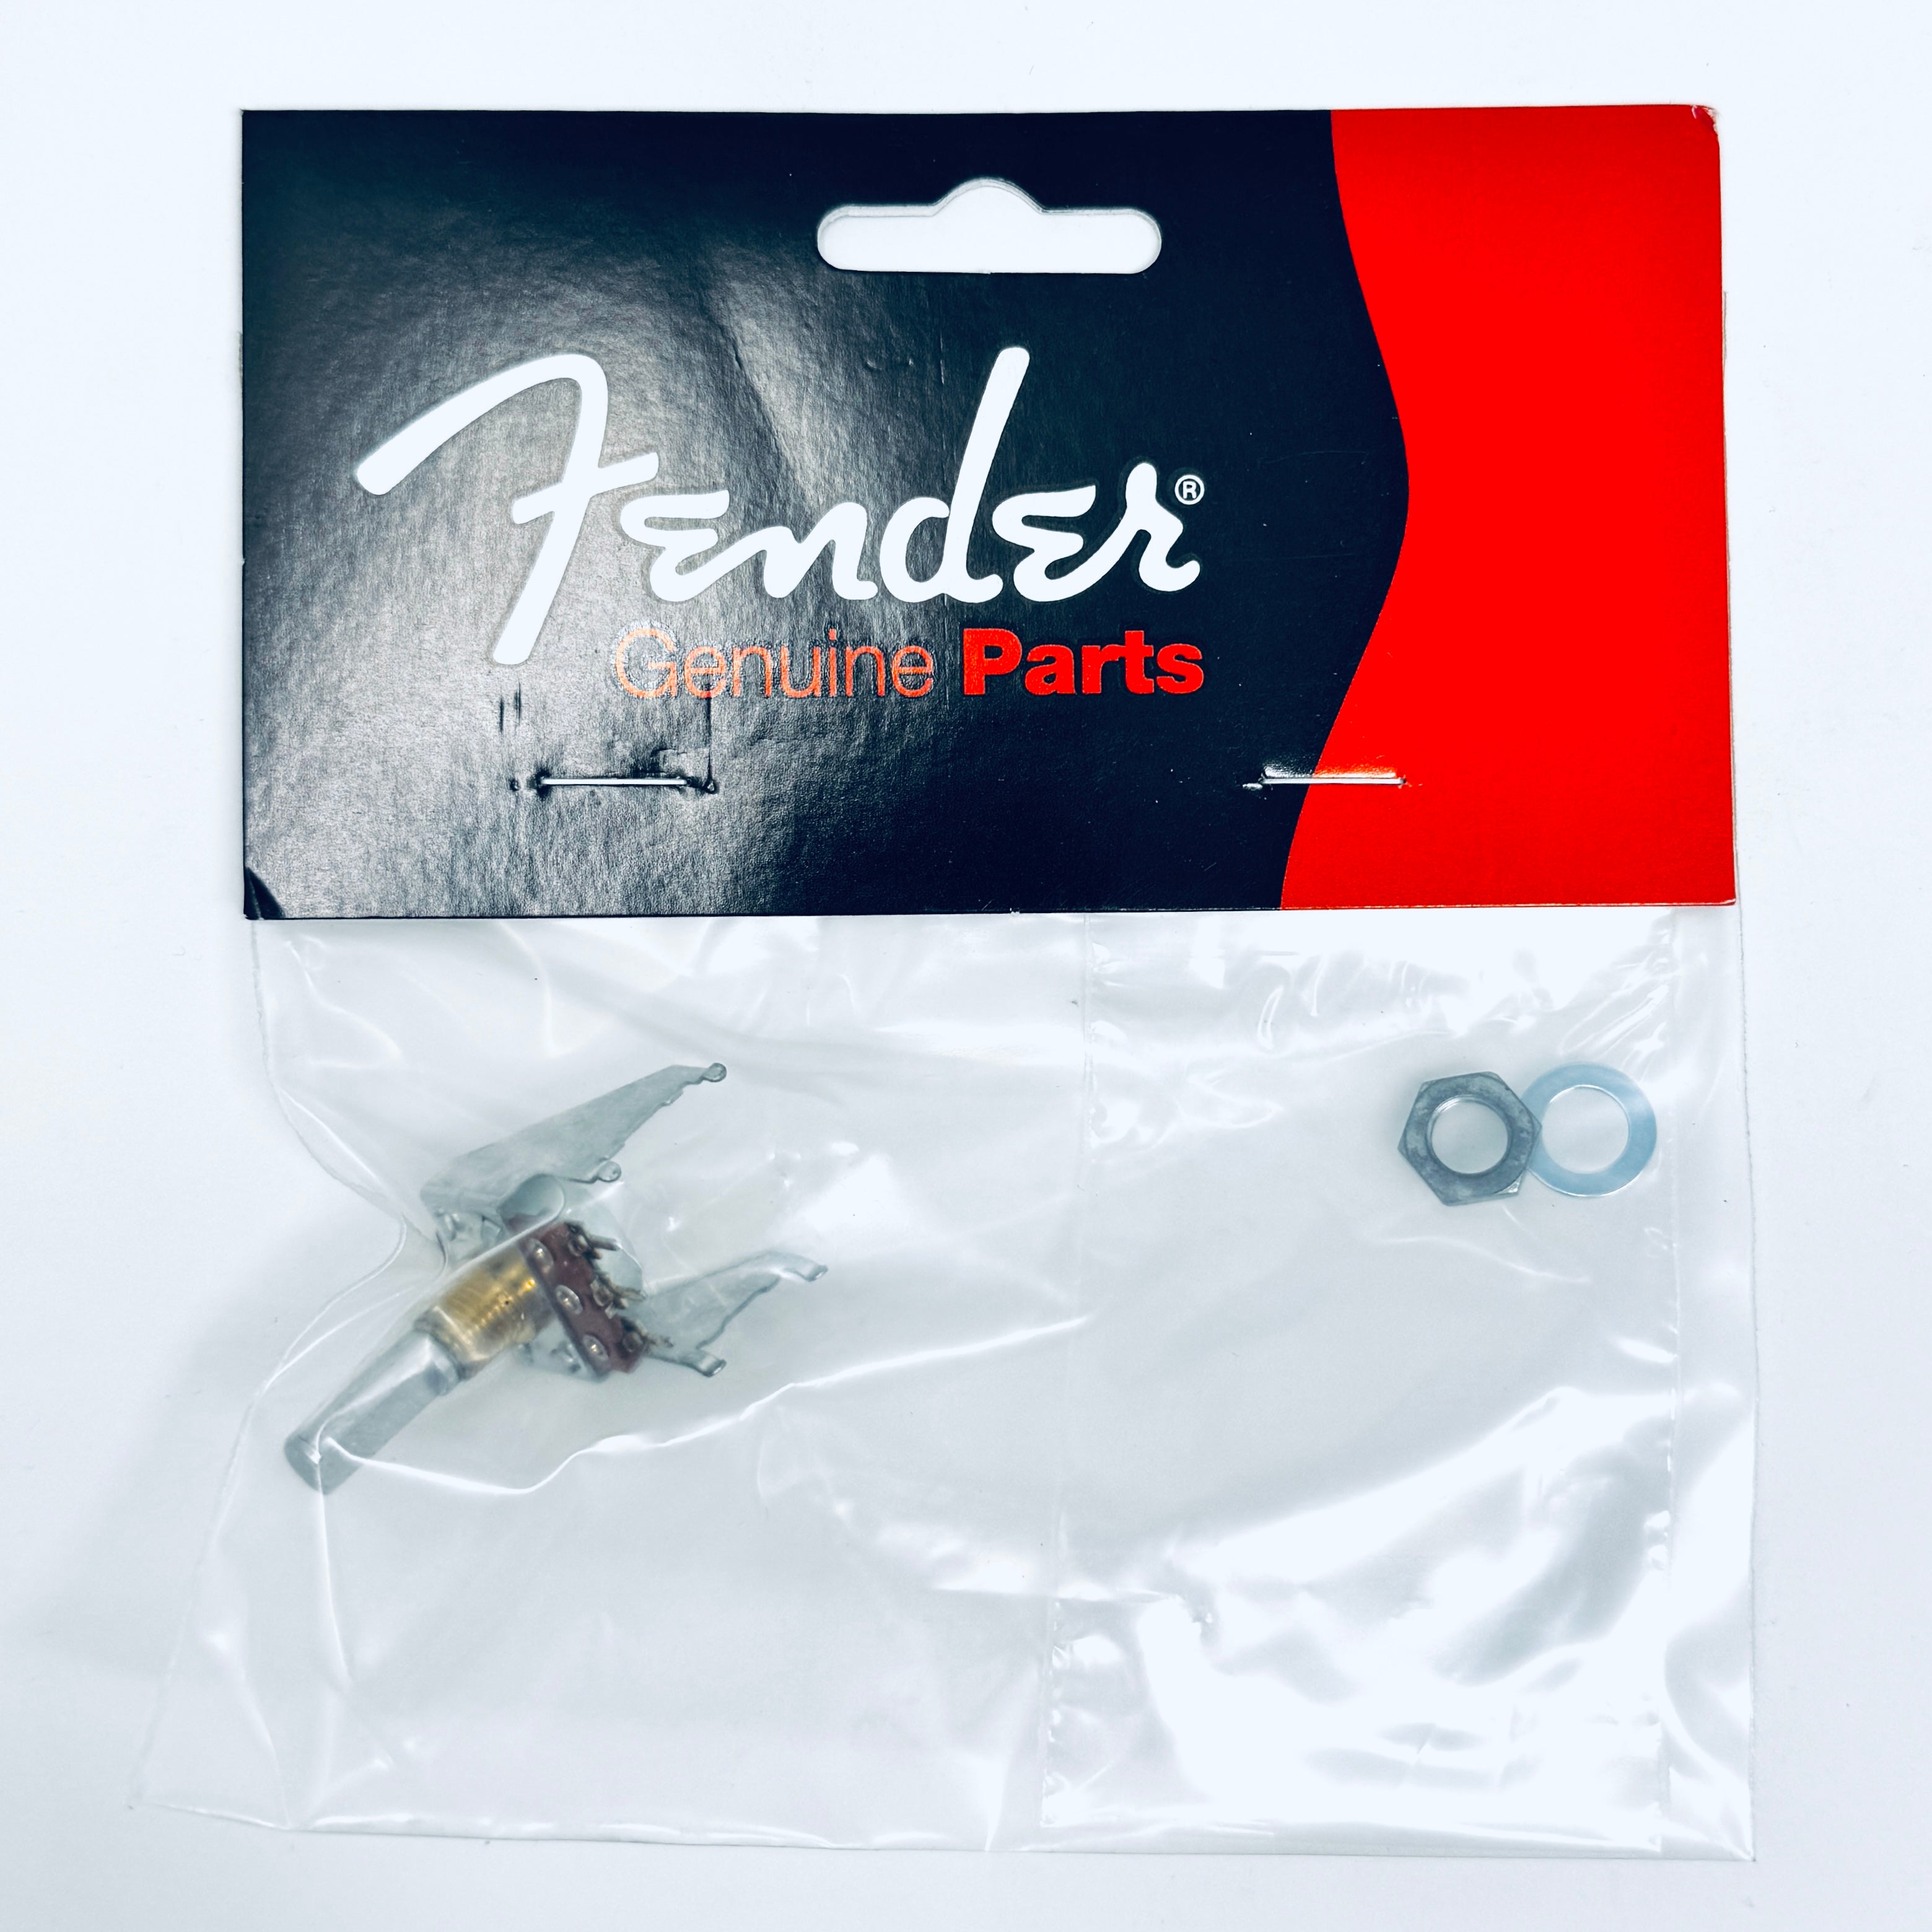 Authentic Fender Control Snapin 100k 30c Taper Potentiometer, authentic fender replacment parts, ruby parts